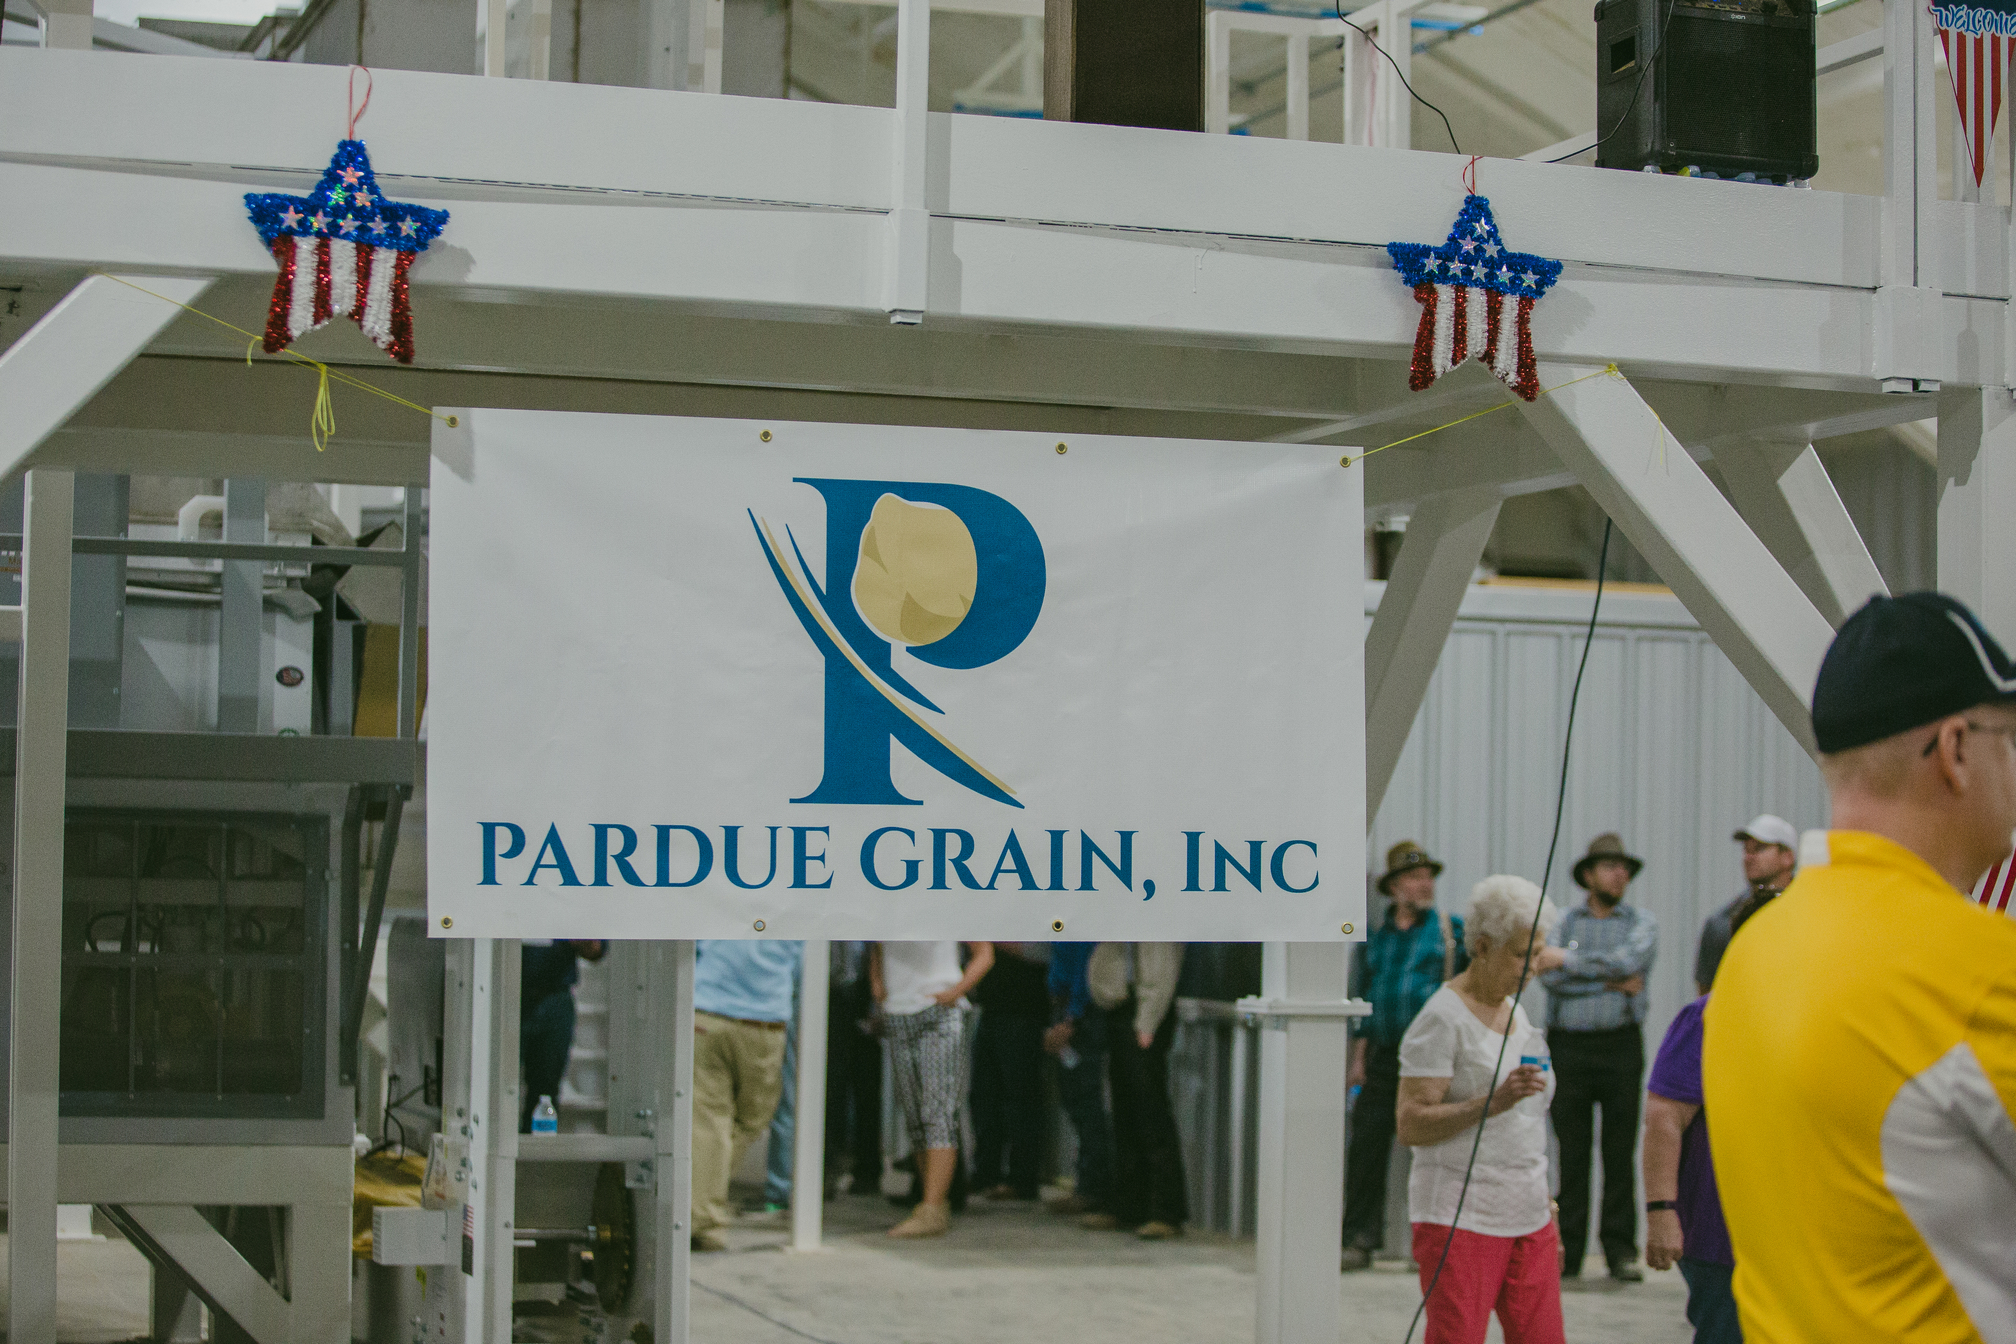 Pardue Grain's new facility will expand its sorting, sizing, cleaning and bagging capabilities. Photo Credit: Amber Fern